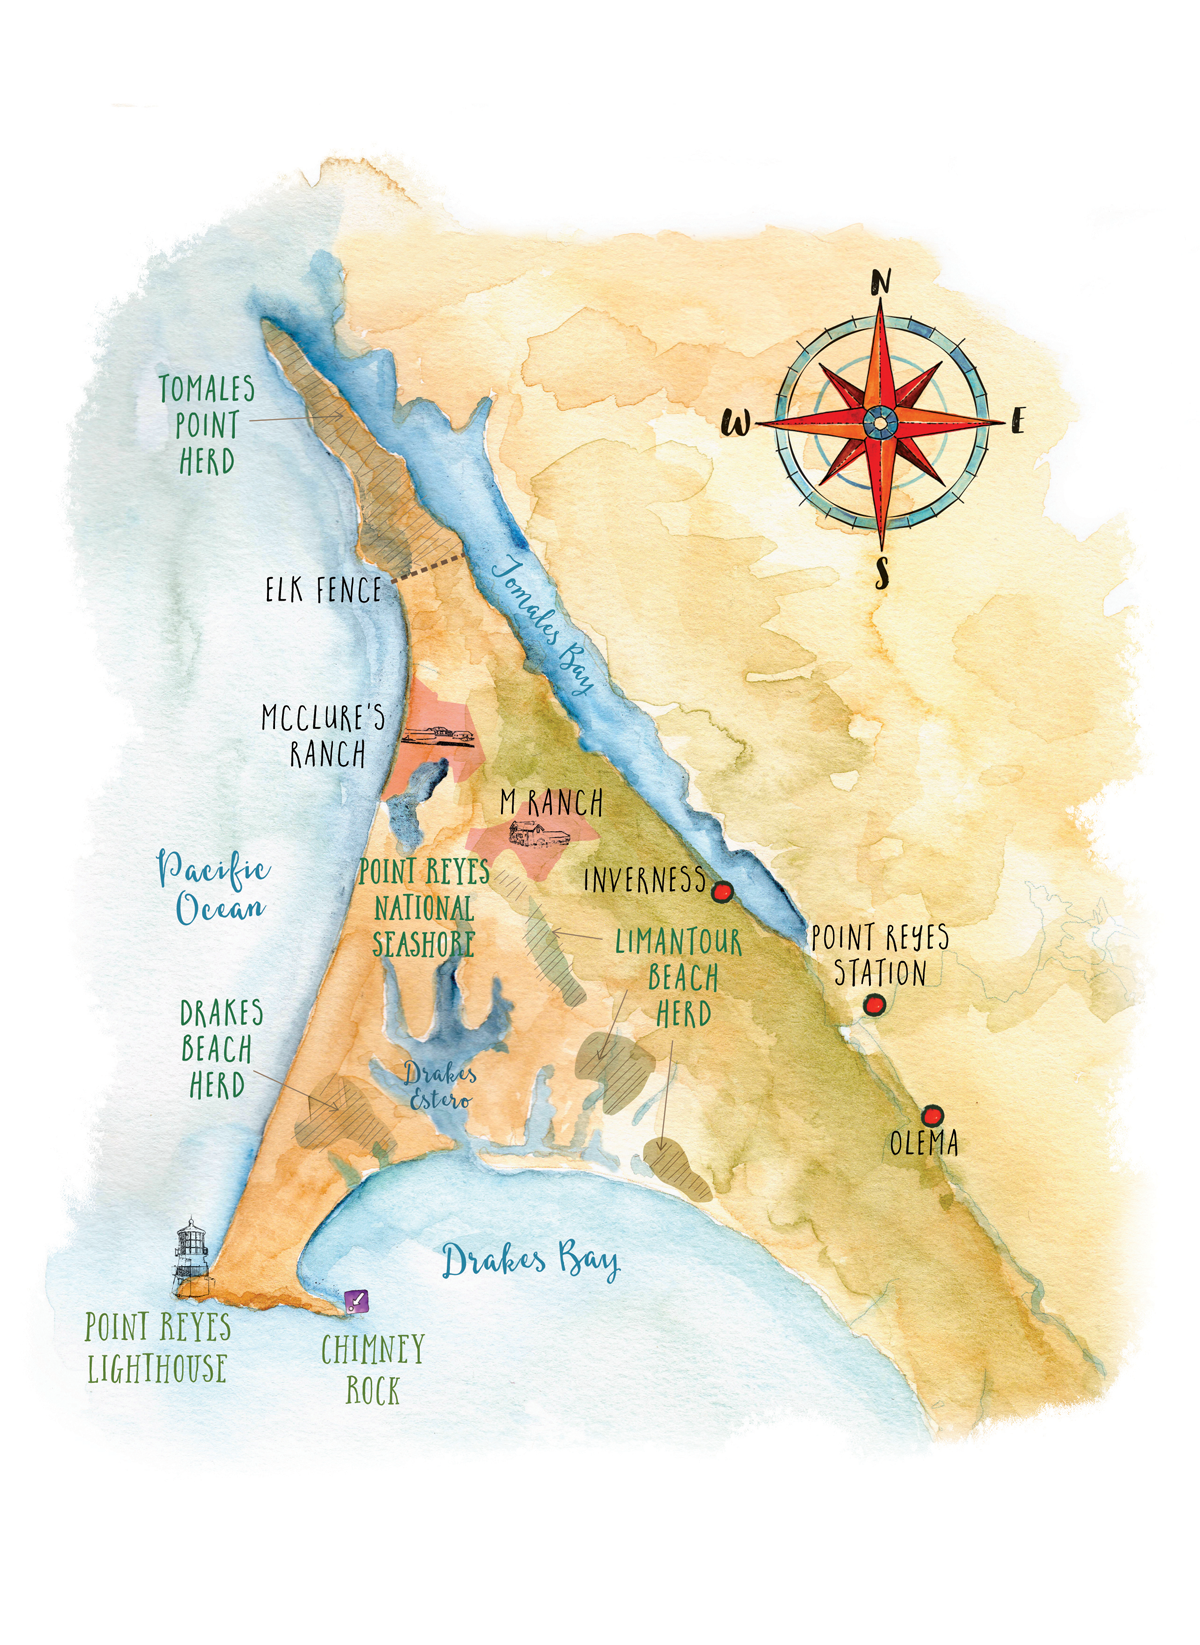 Illustrated map shows the Point Reyes National Seashore and surroundings as well as where the elk herds are.